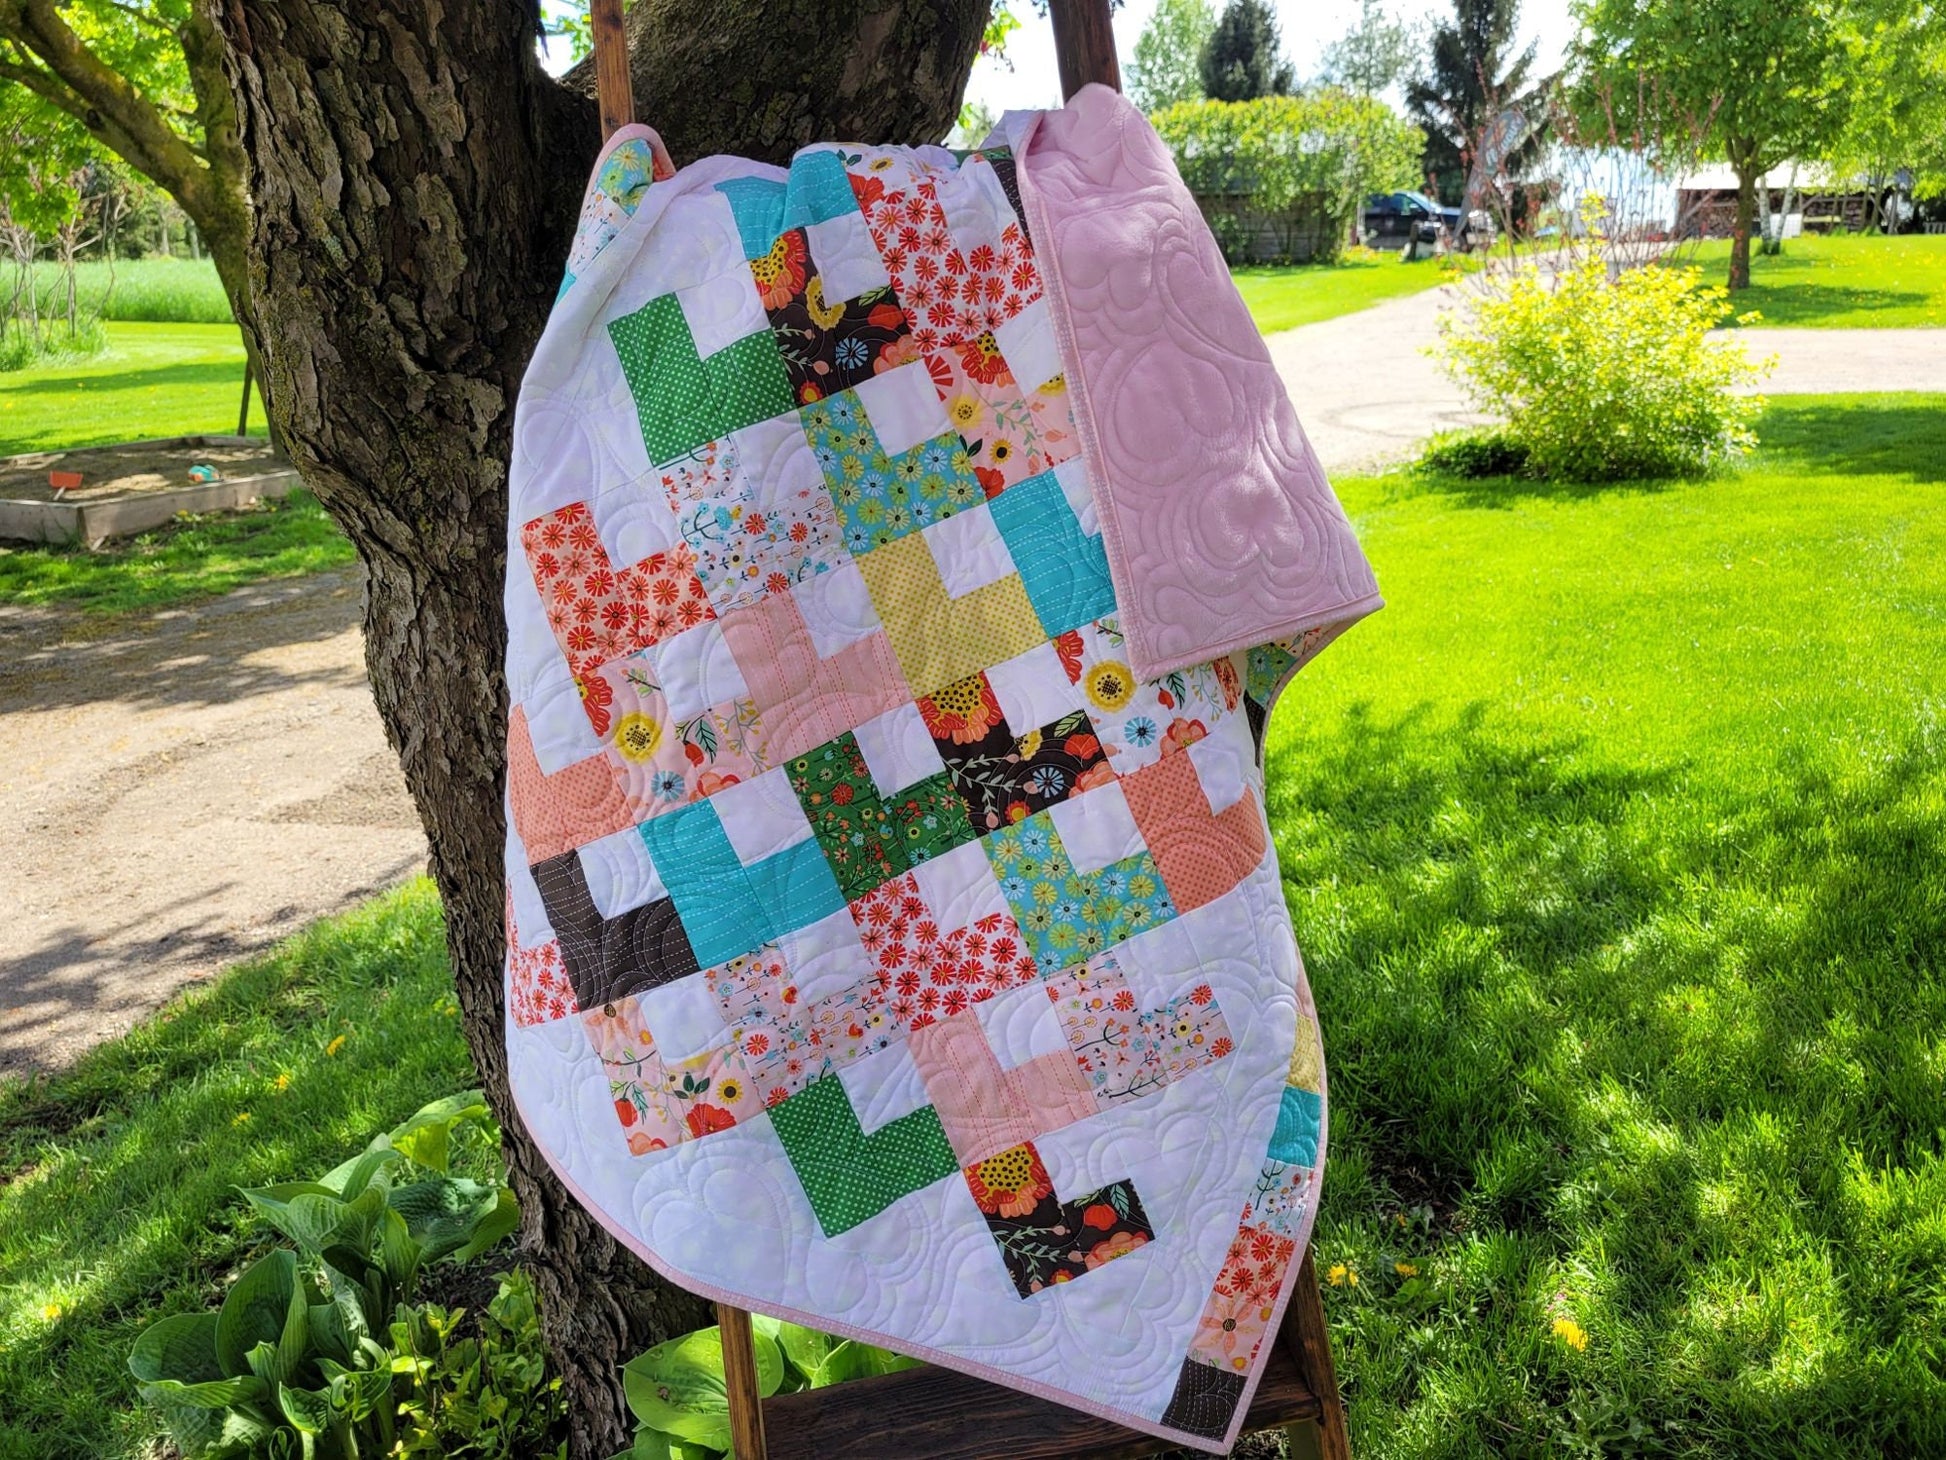 baby quilt shown ourdoors under a tree